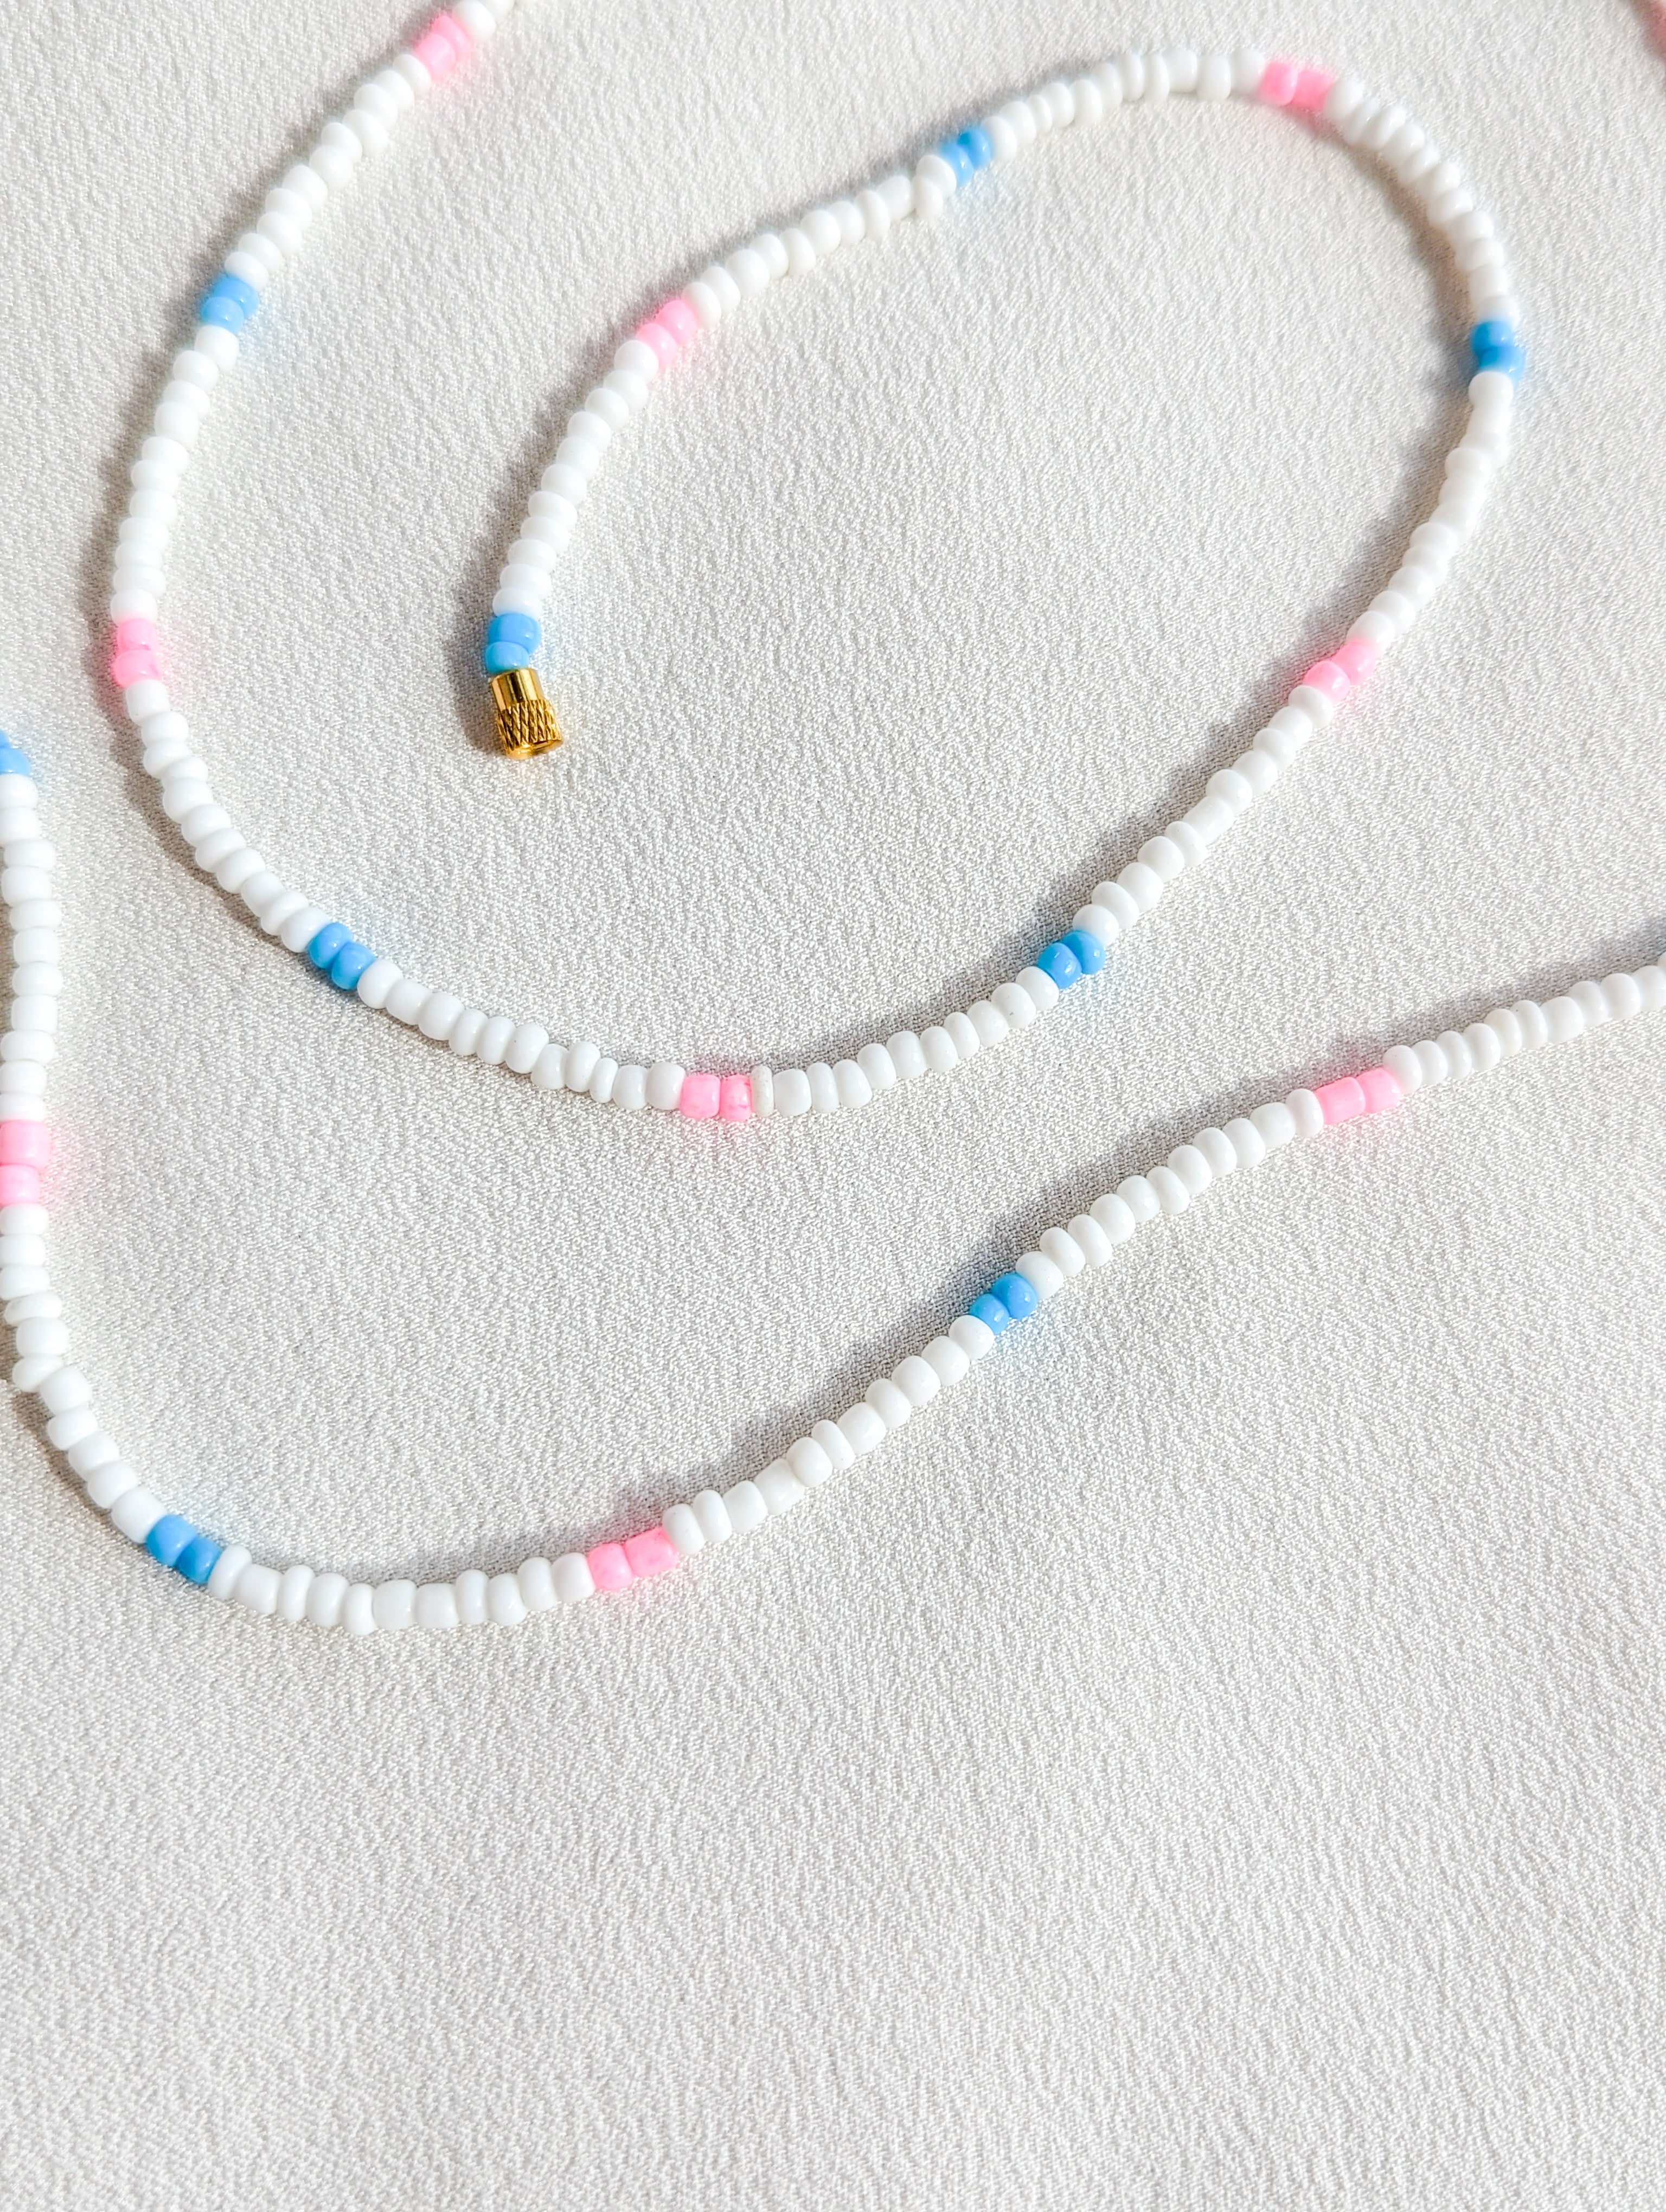 [THE ELEVEN] Belly Chain: White/Pink + Blue [Small Beads]